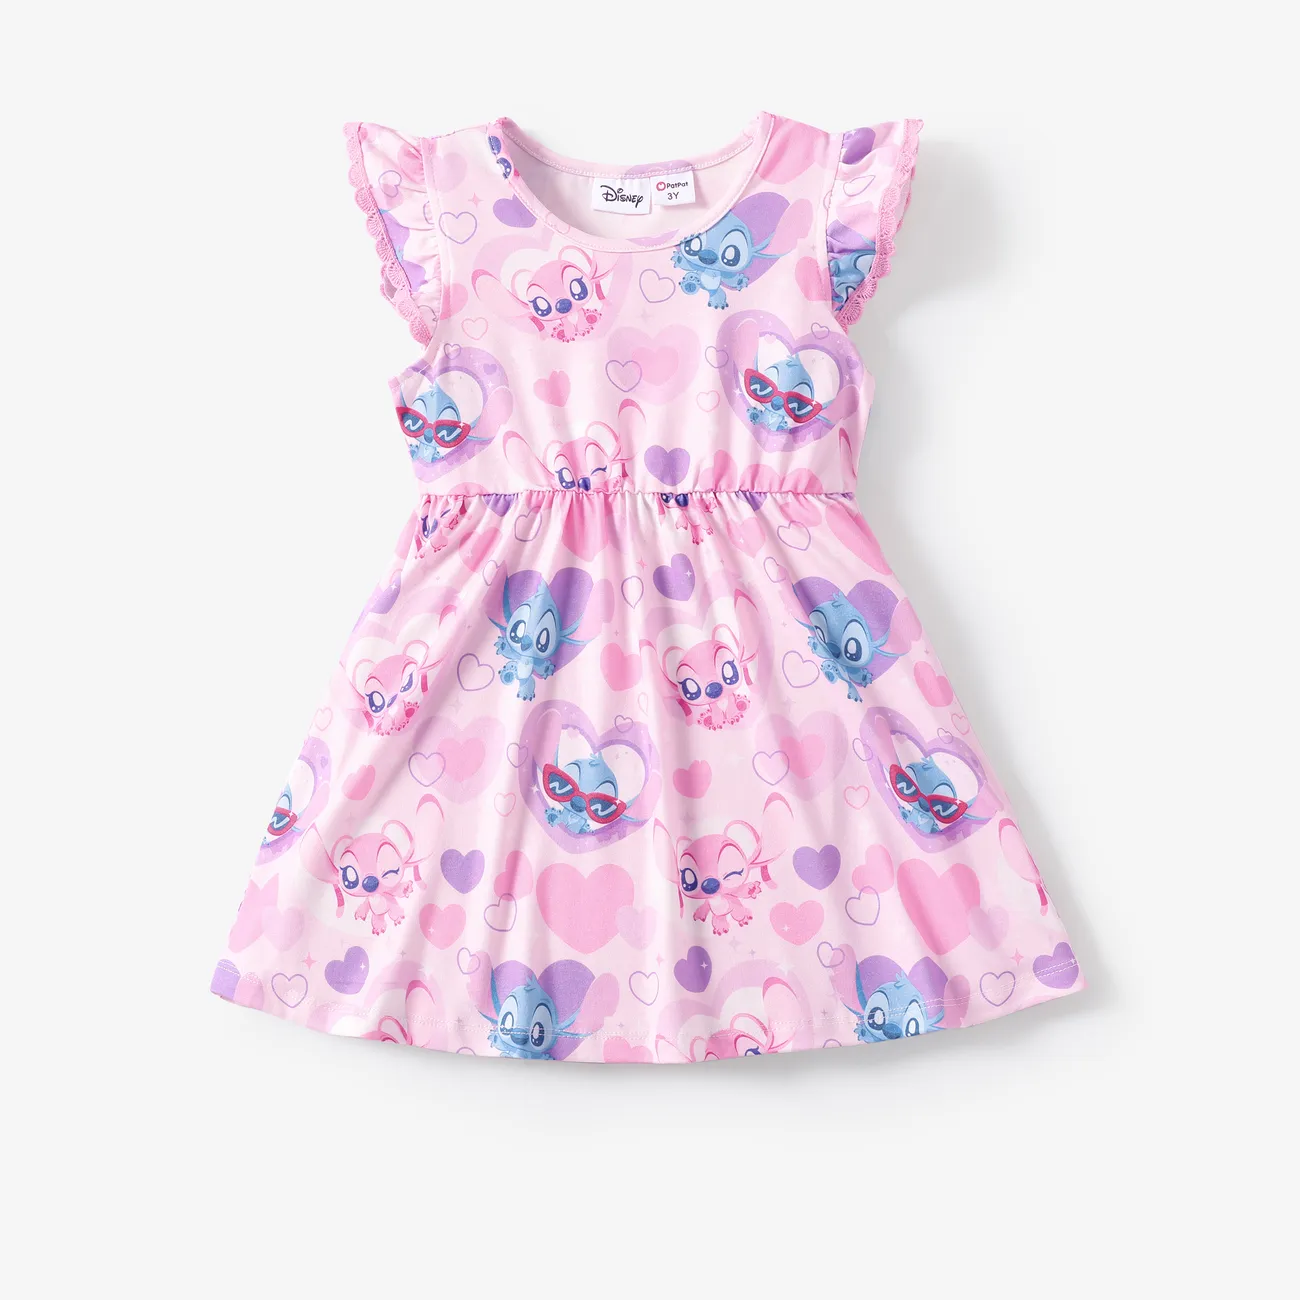 Disney Stitch Toddler Girls 1pc Naia™ Character All-over Print Ruffle-sleeve Dress Pink big image 1